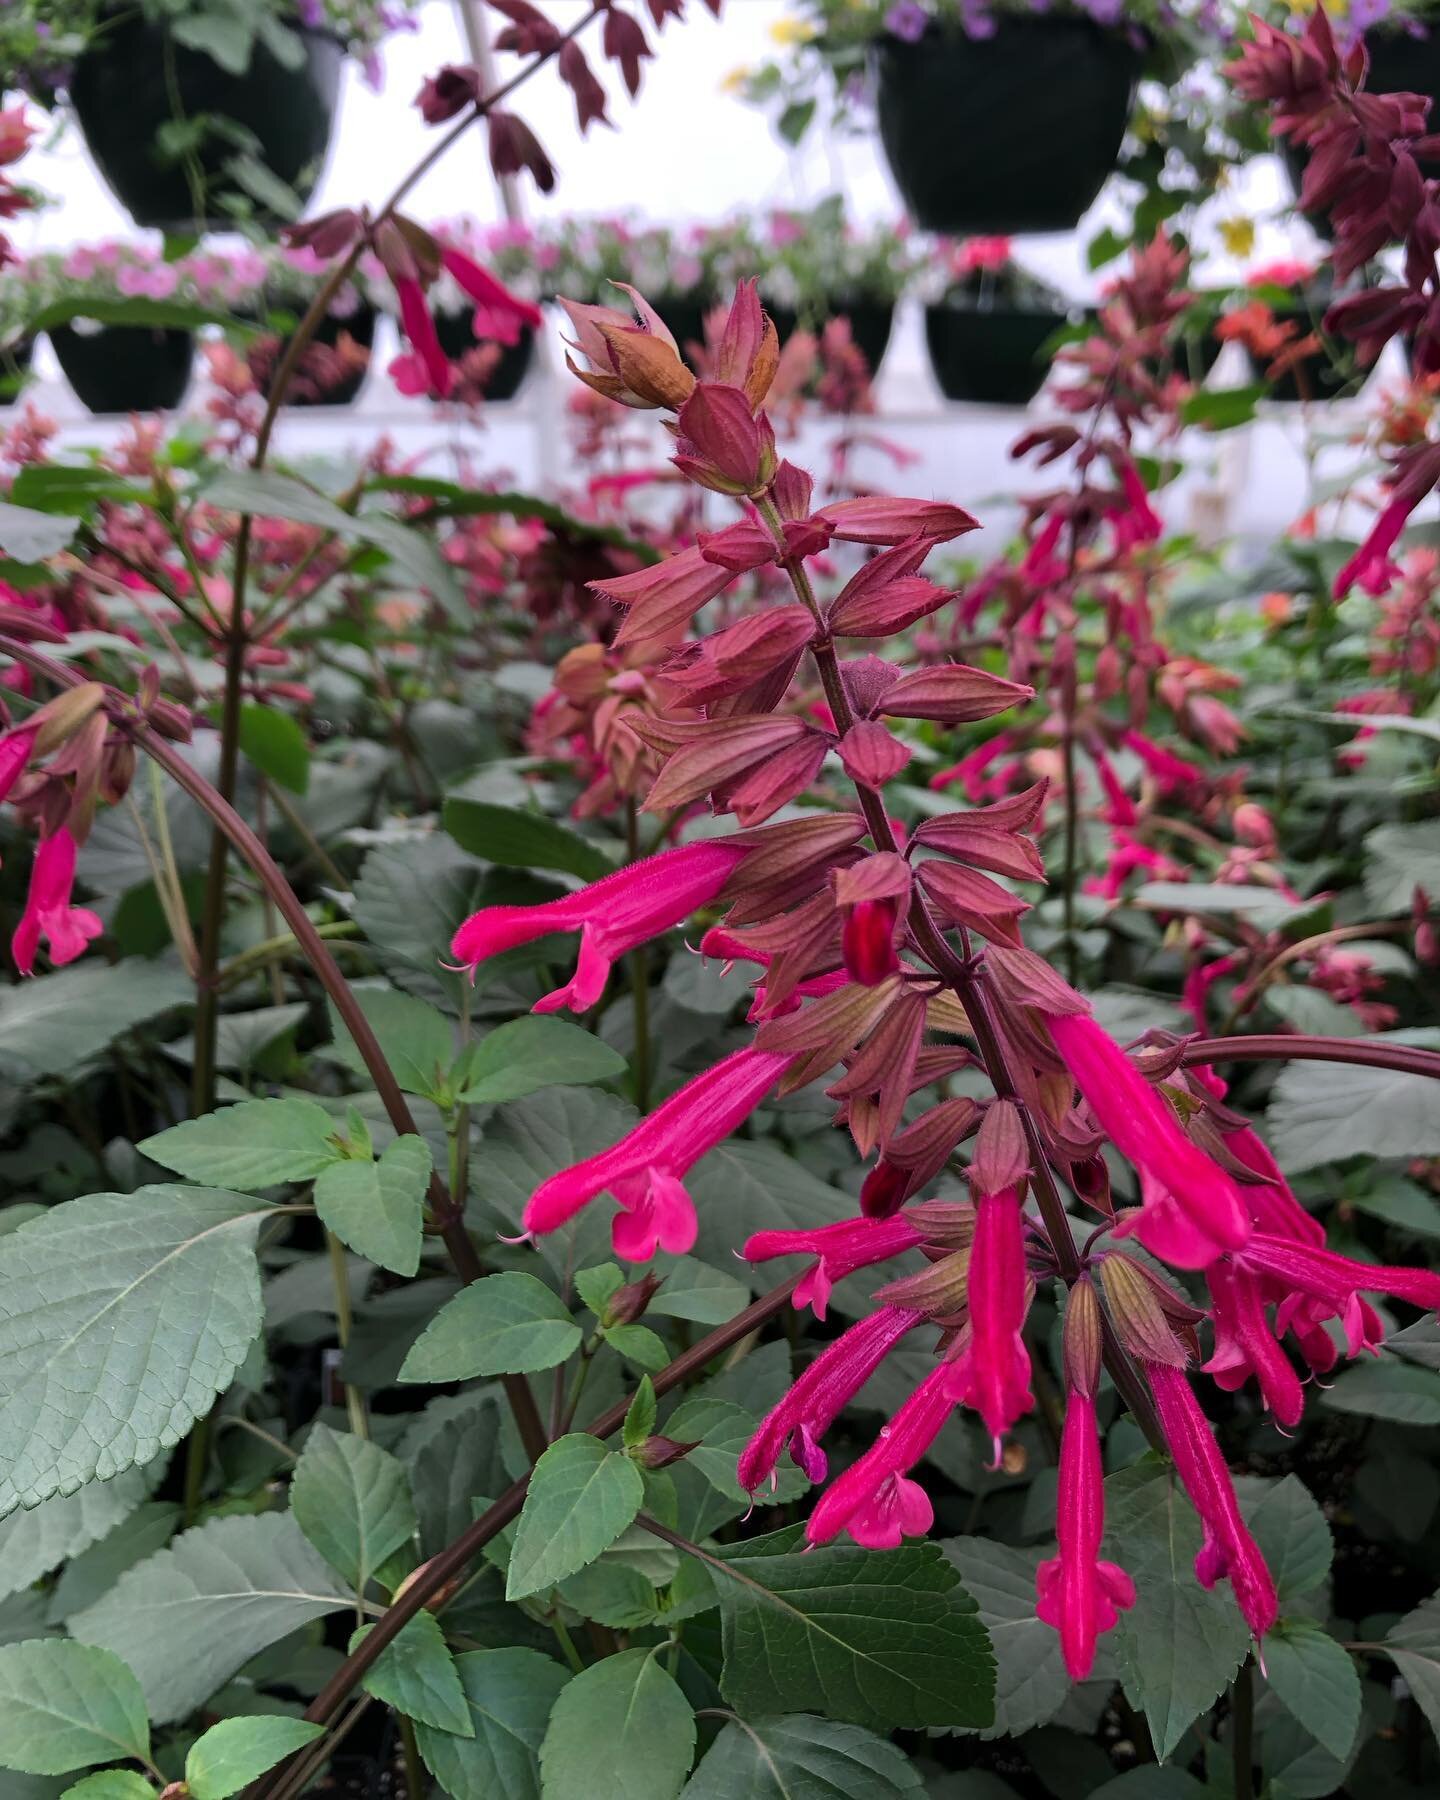 Amazing things are happening in our greenhouses!
Open today&mdash;10-5 ! 
&hearts;️🪴🌼🌸🌺